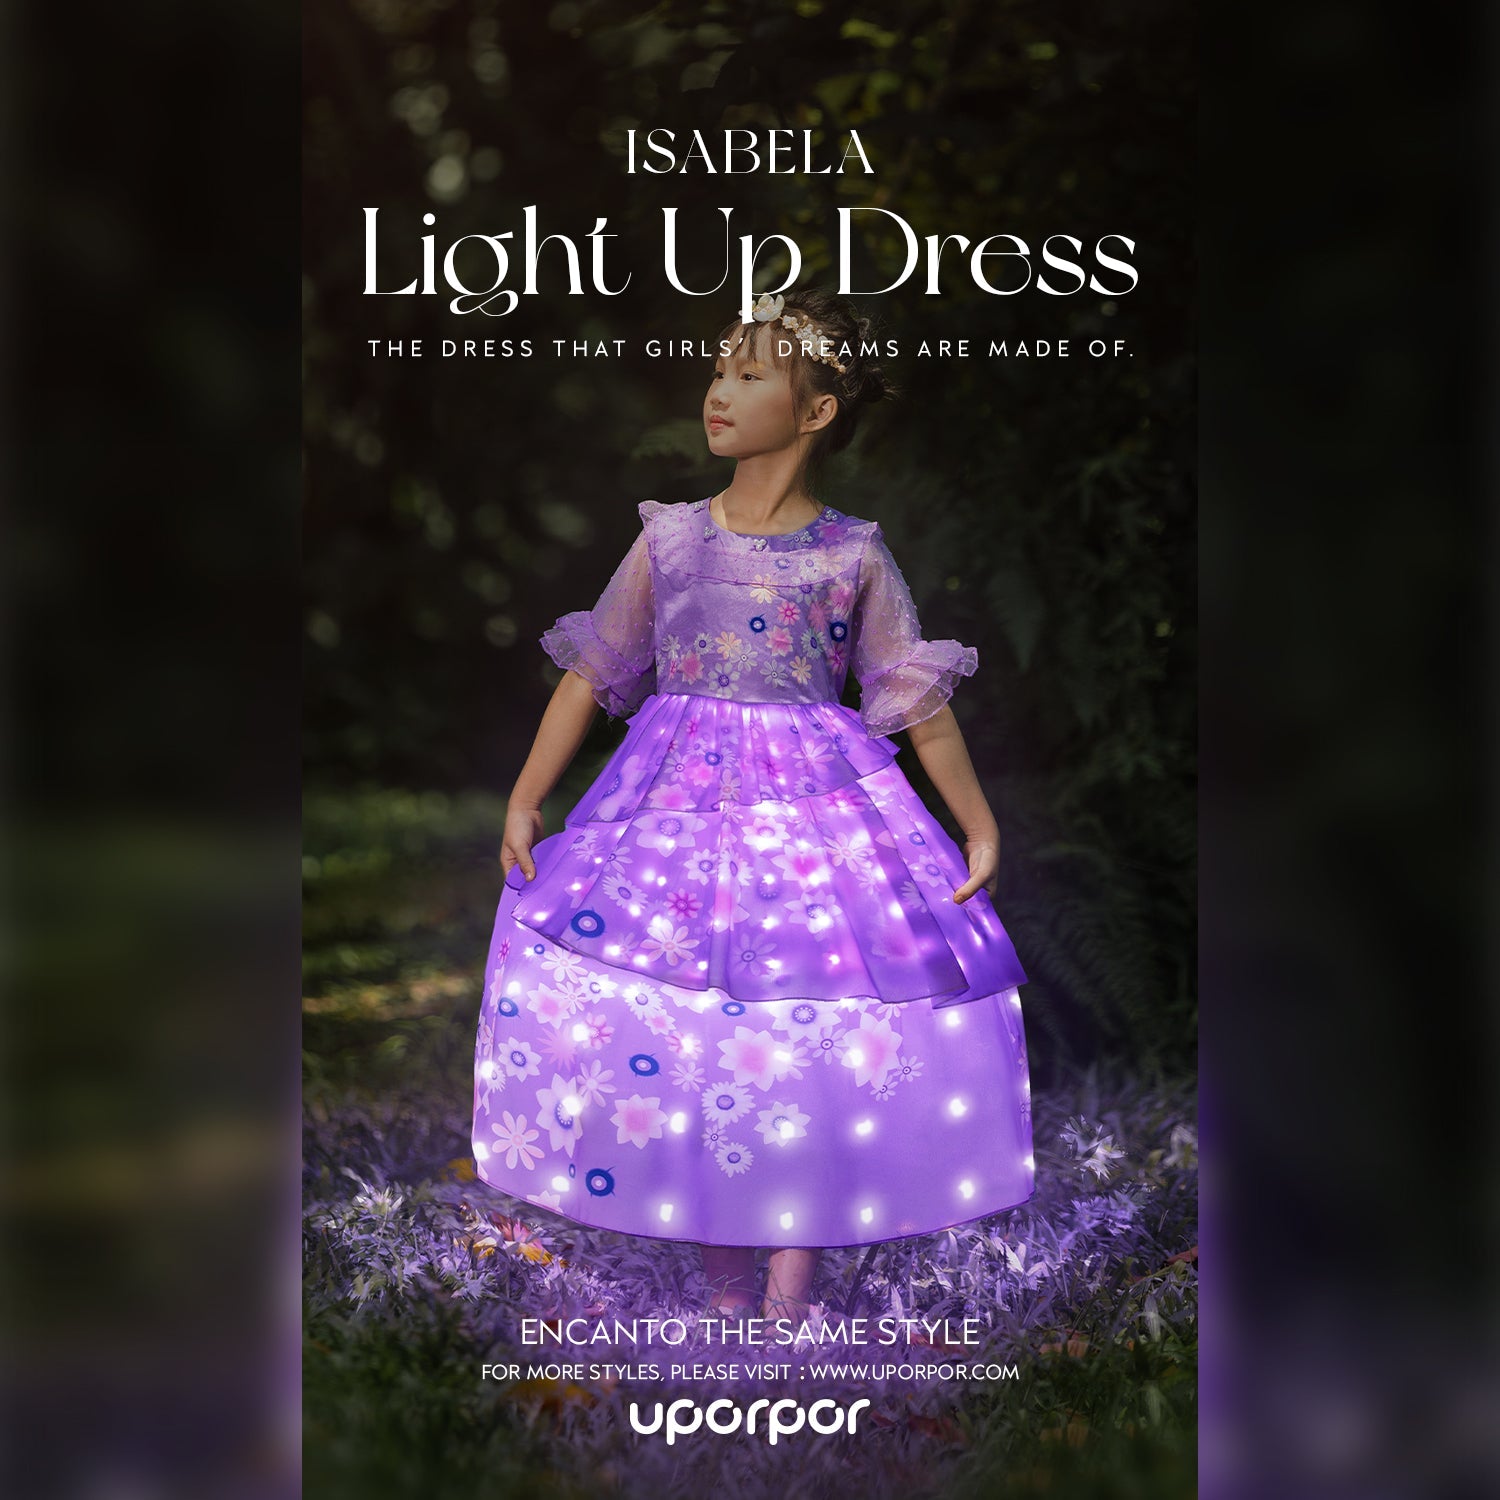 LED Clothing Is Here And It's Going To Change Everything - Uporpor